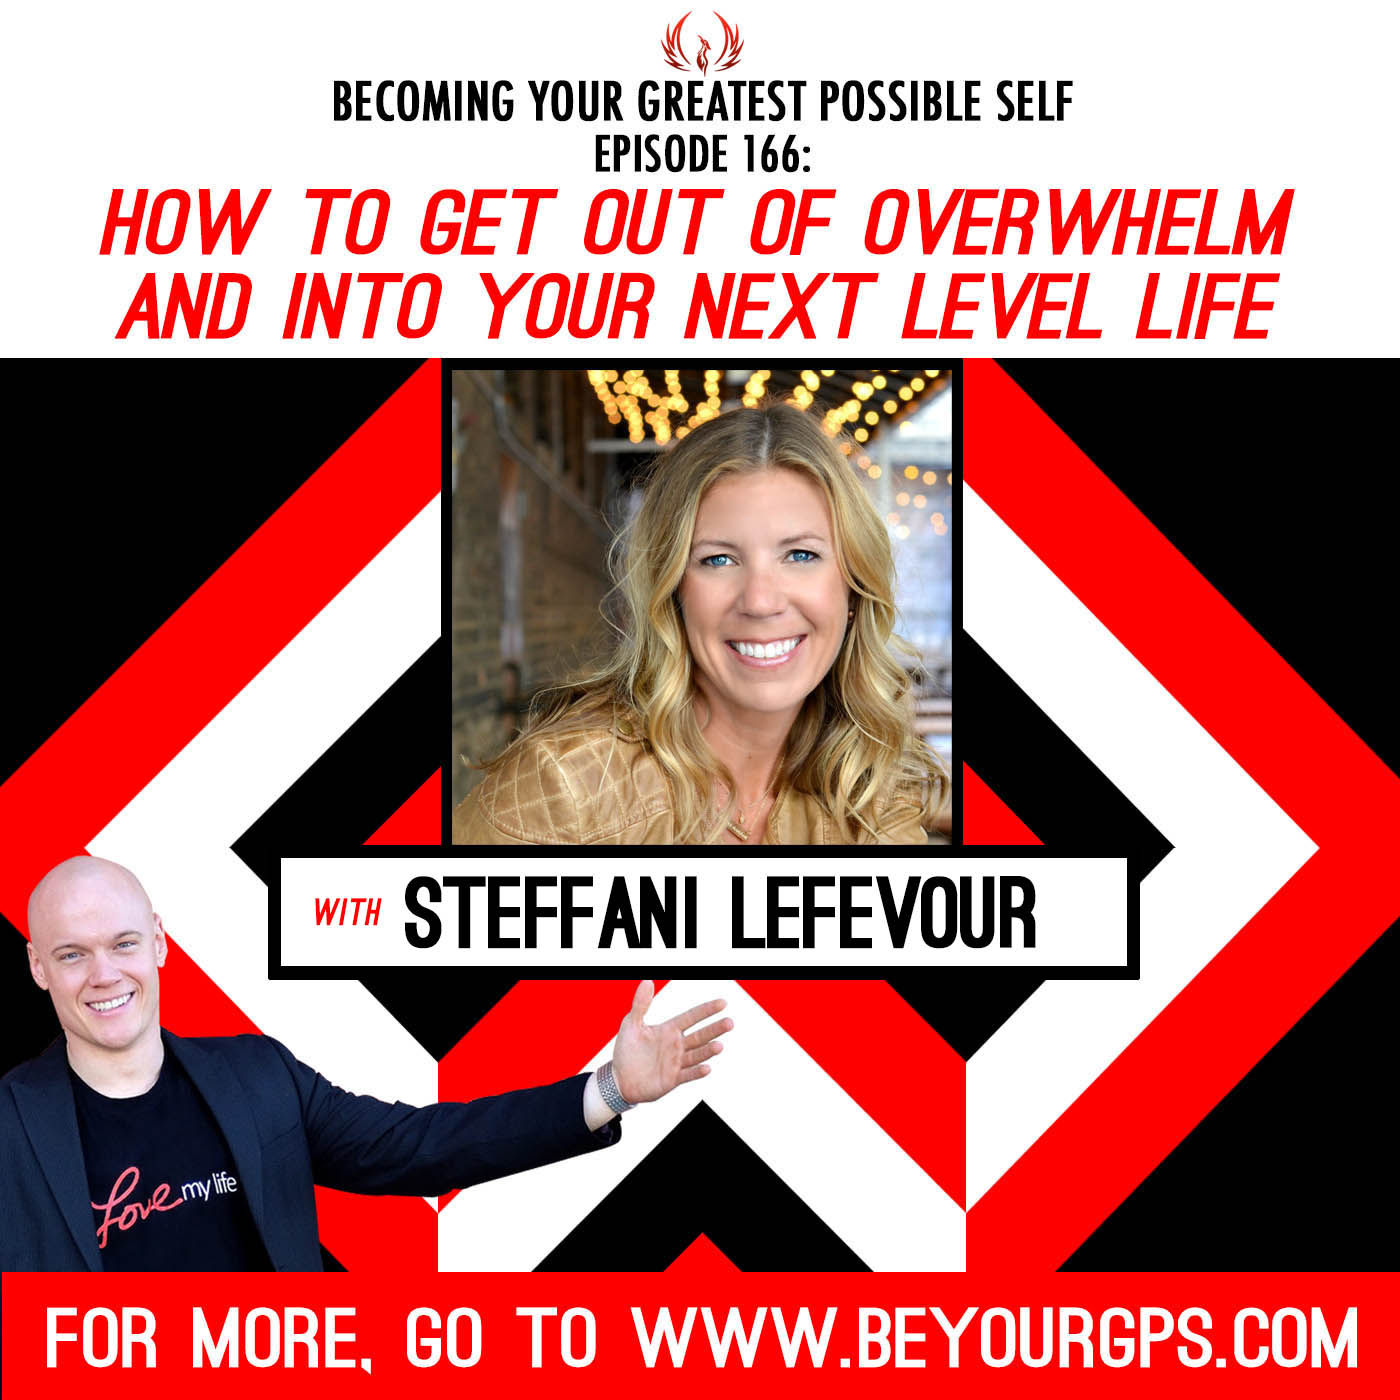 How to Get Out of Overwhelm and into Your Next Level Life with Steffani LeFevour